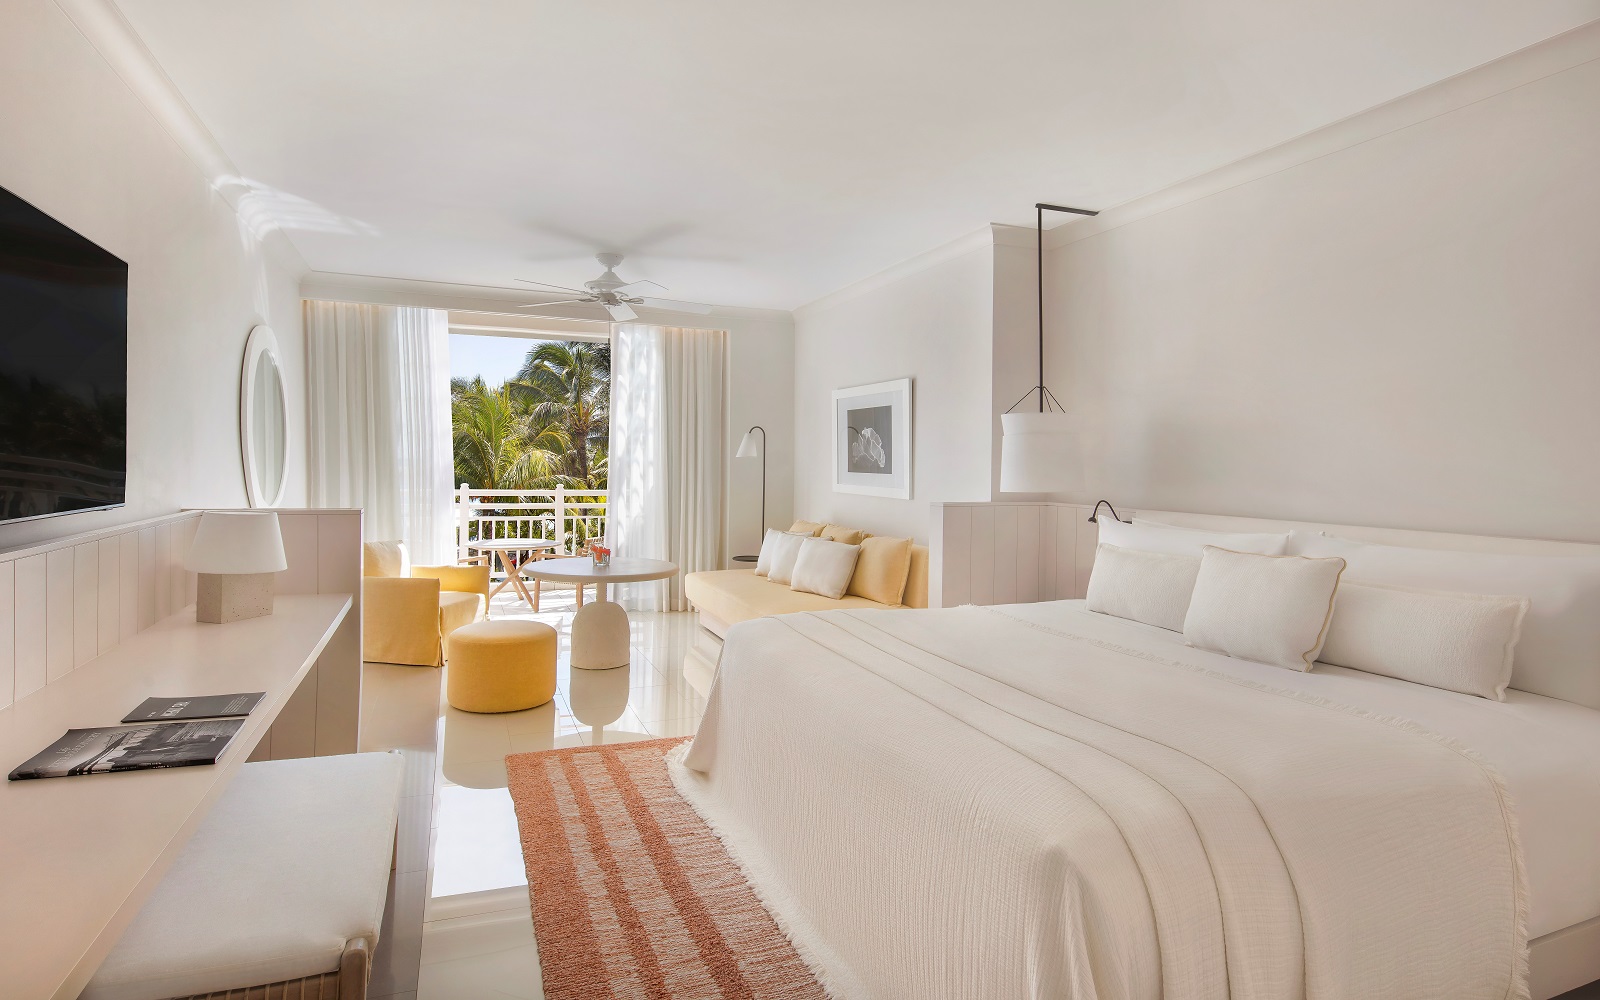 white bed in a white room with white furniture and fittings and doors opening onto balcony and greenery at LUX* Belle Mare, Mauritius